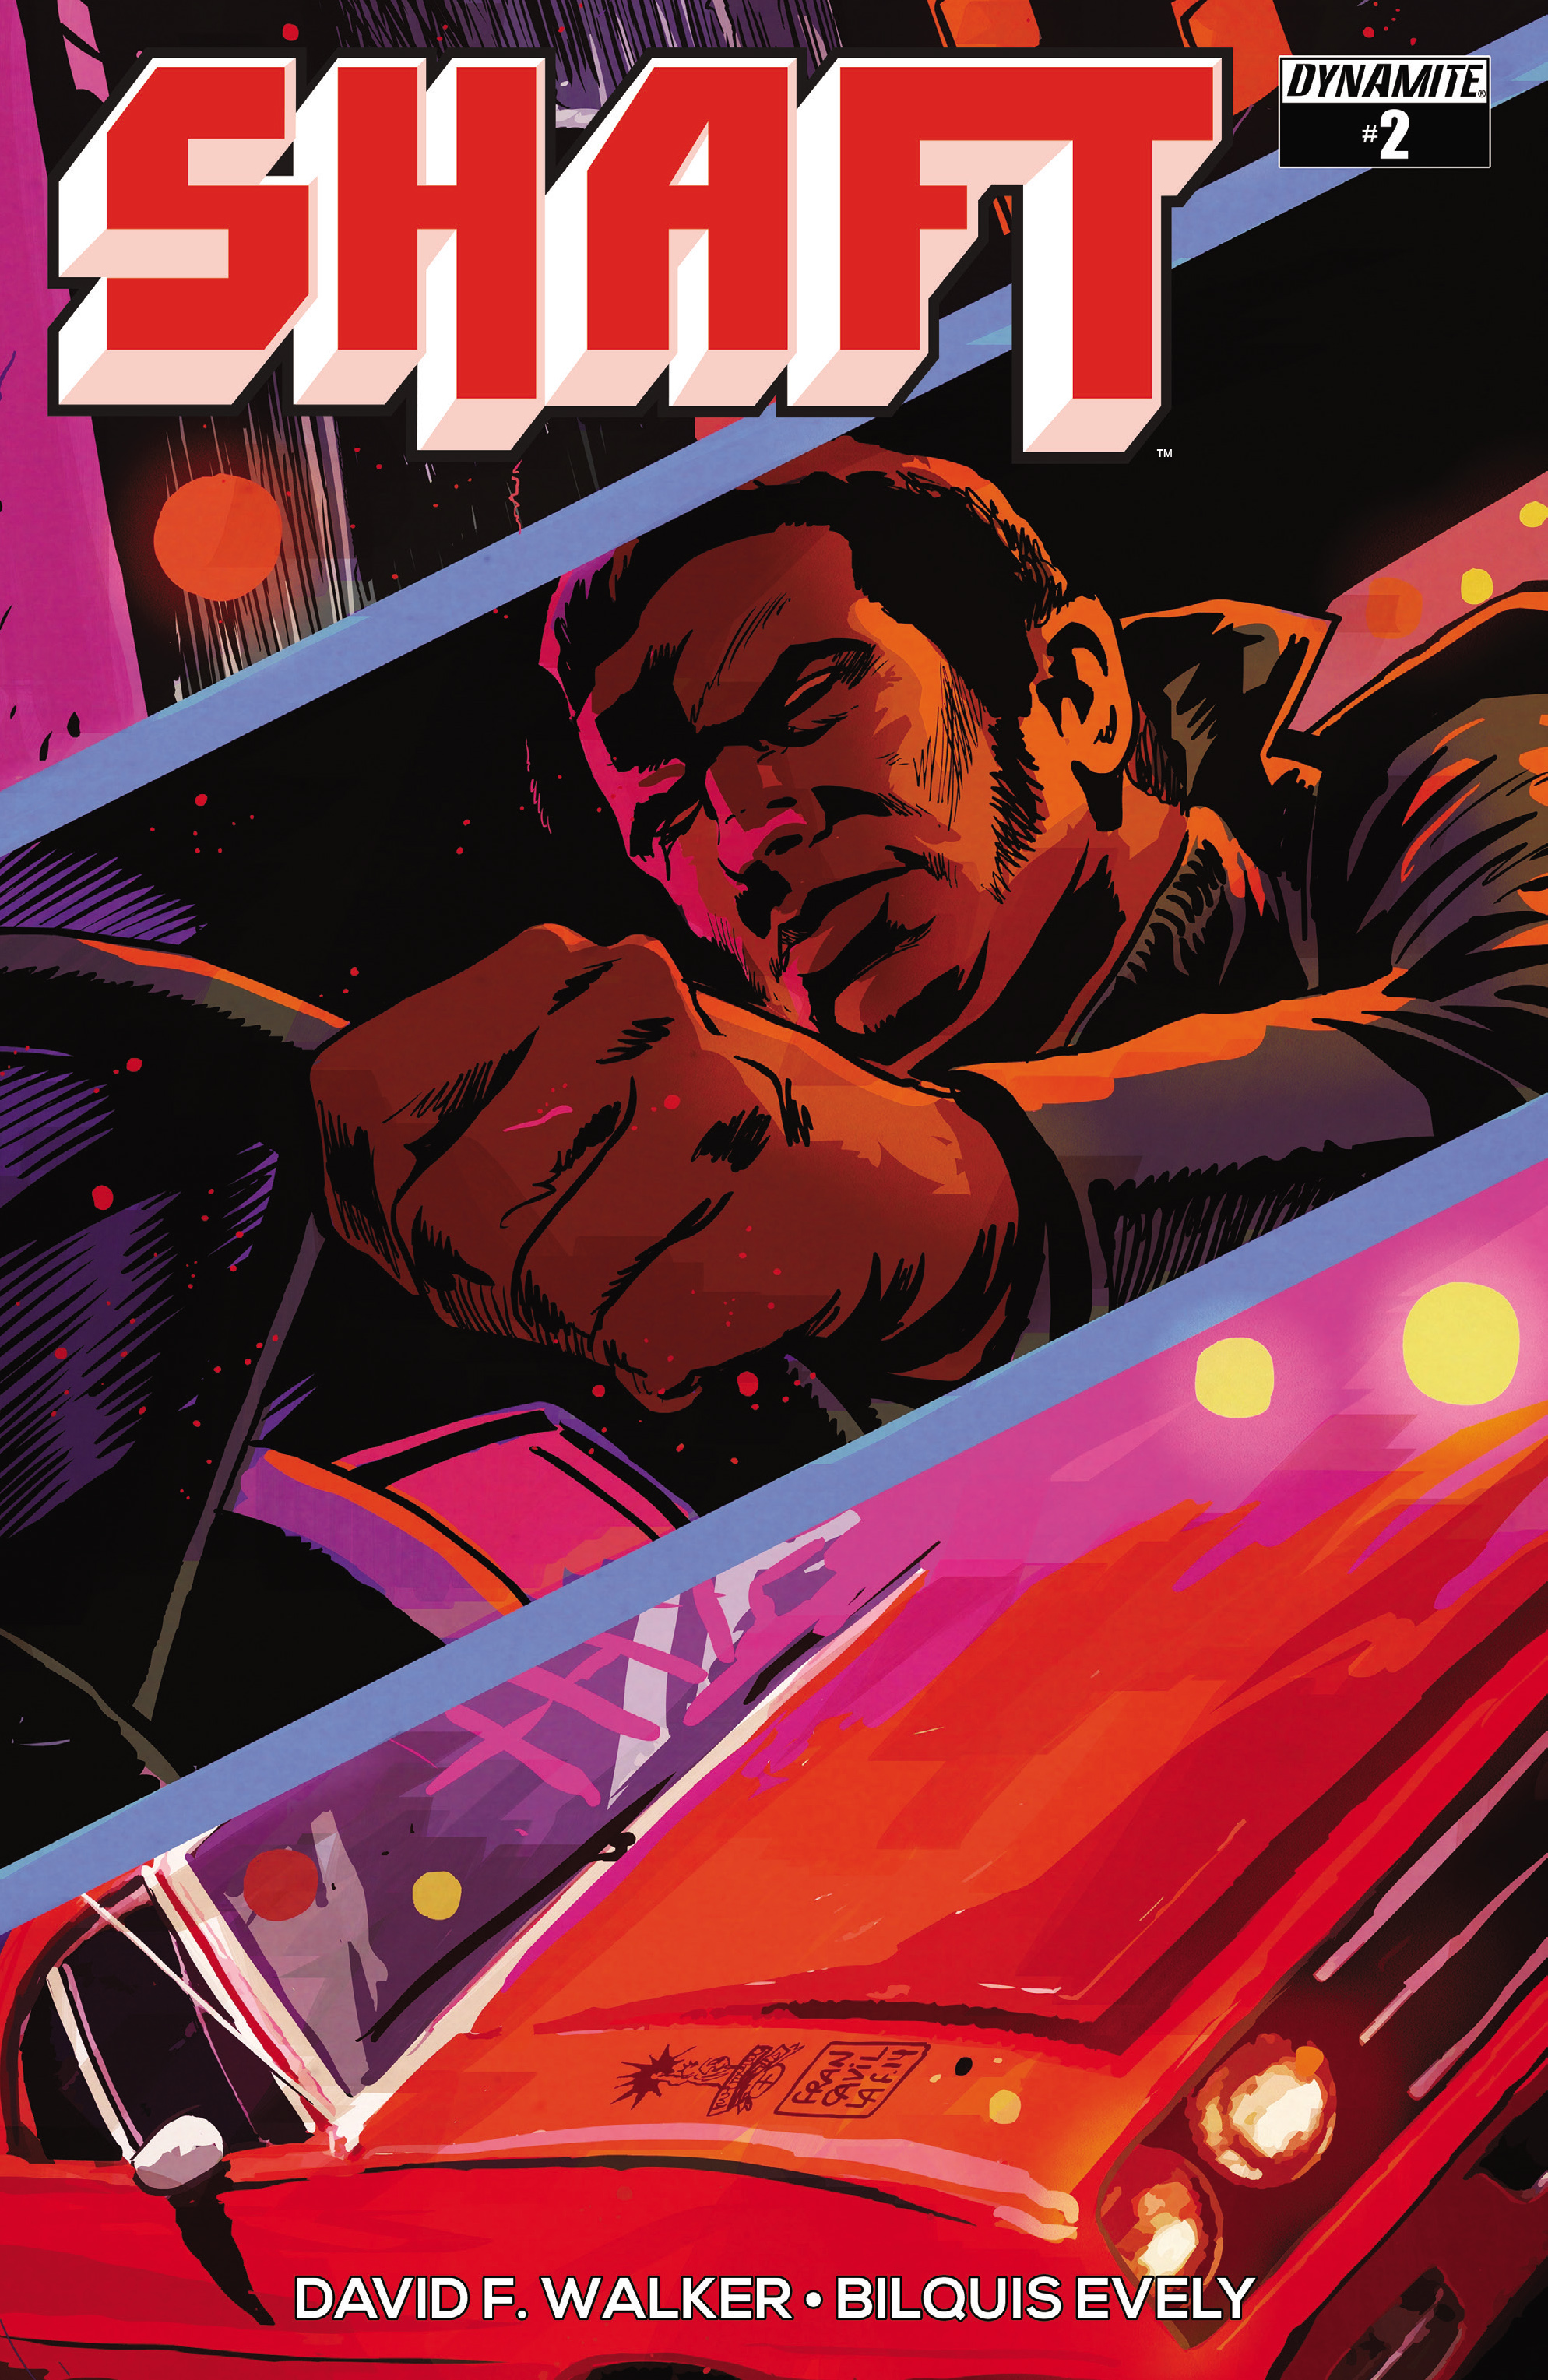 Read online Shaft comic -  Issue #2 - 2